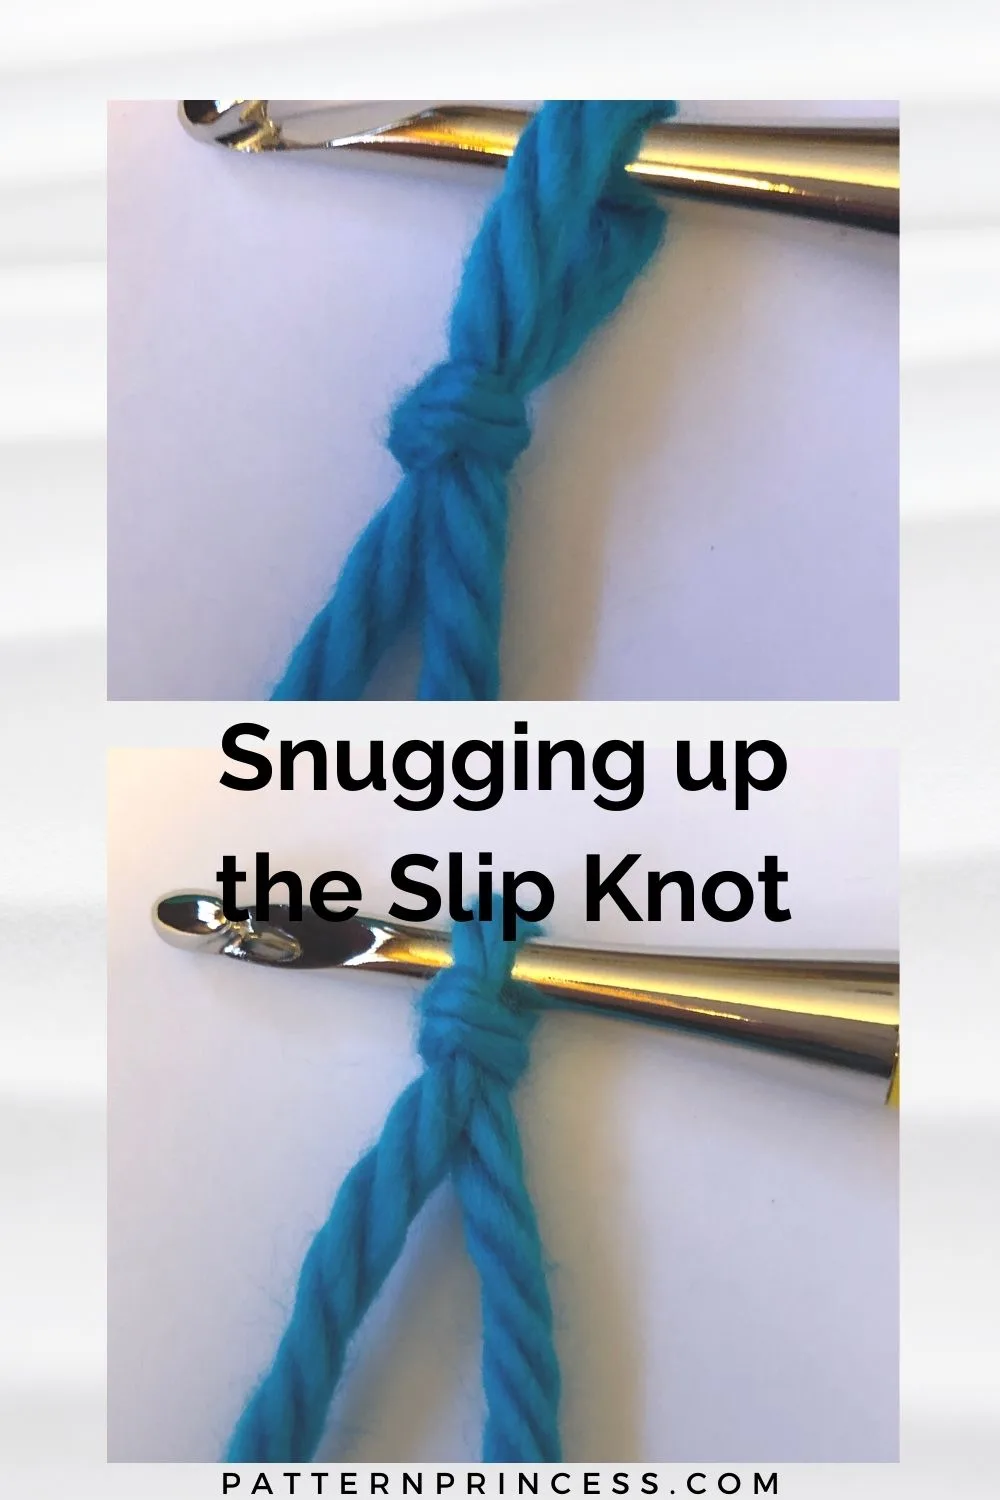 Snugging up a Slip Knot